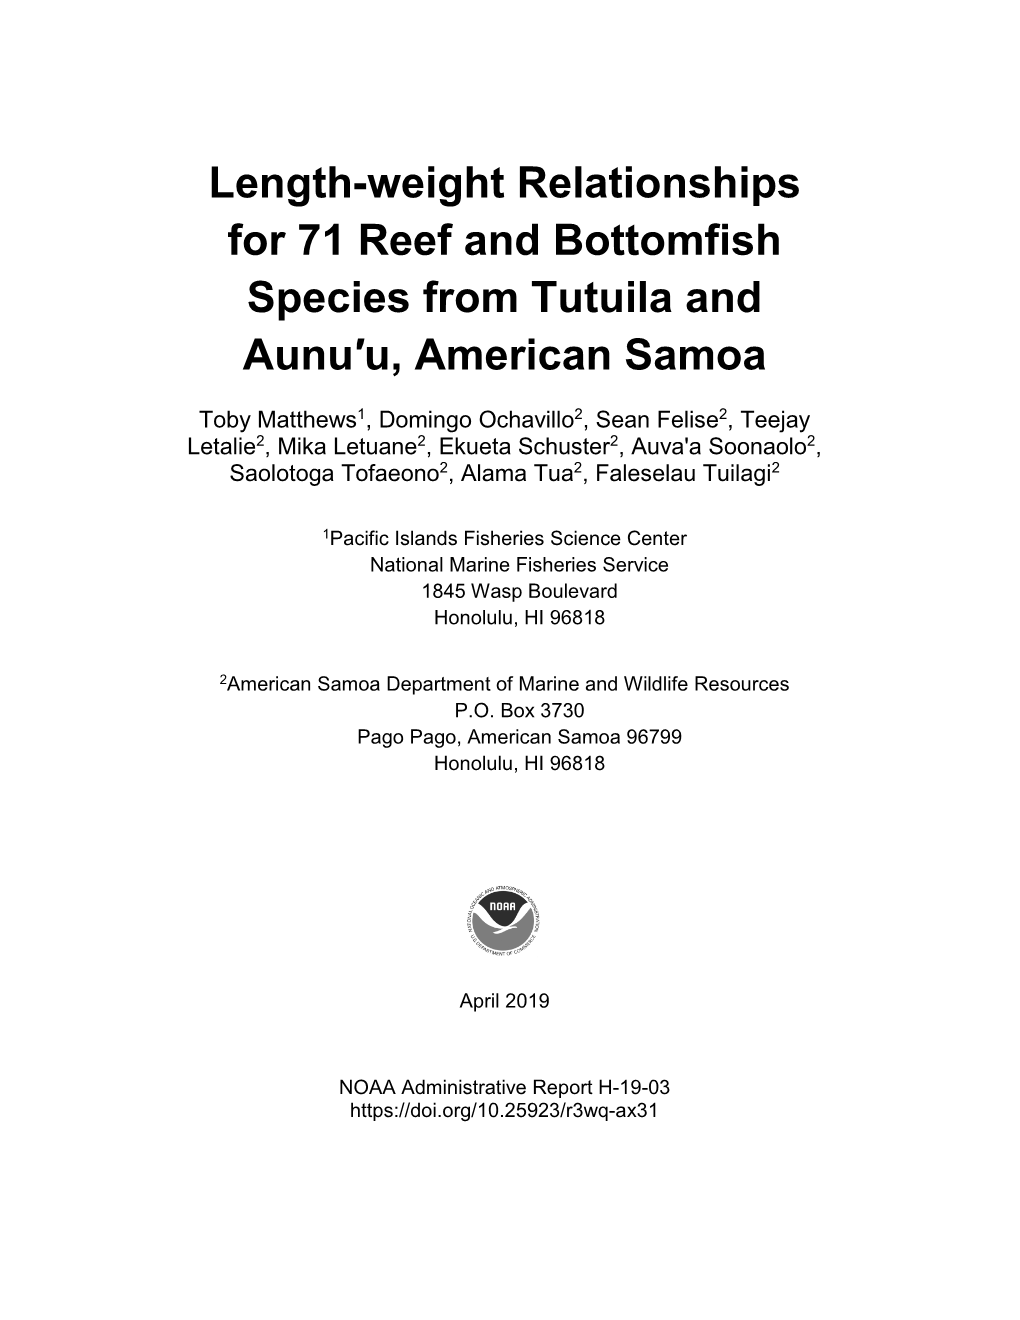 Length-Weight Relationships for 71 Reef and Bottomfish Species from Tutuila and Aunu'u, American Samoa